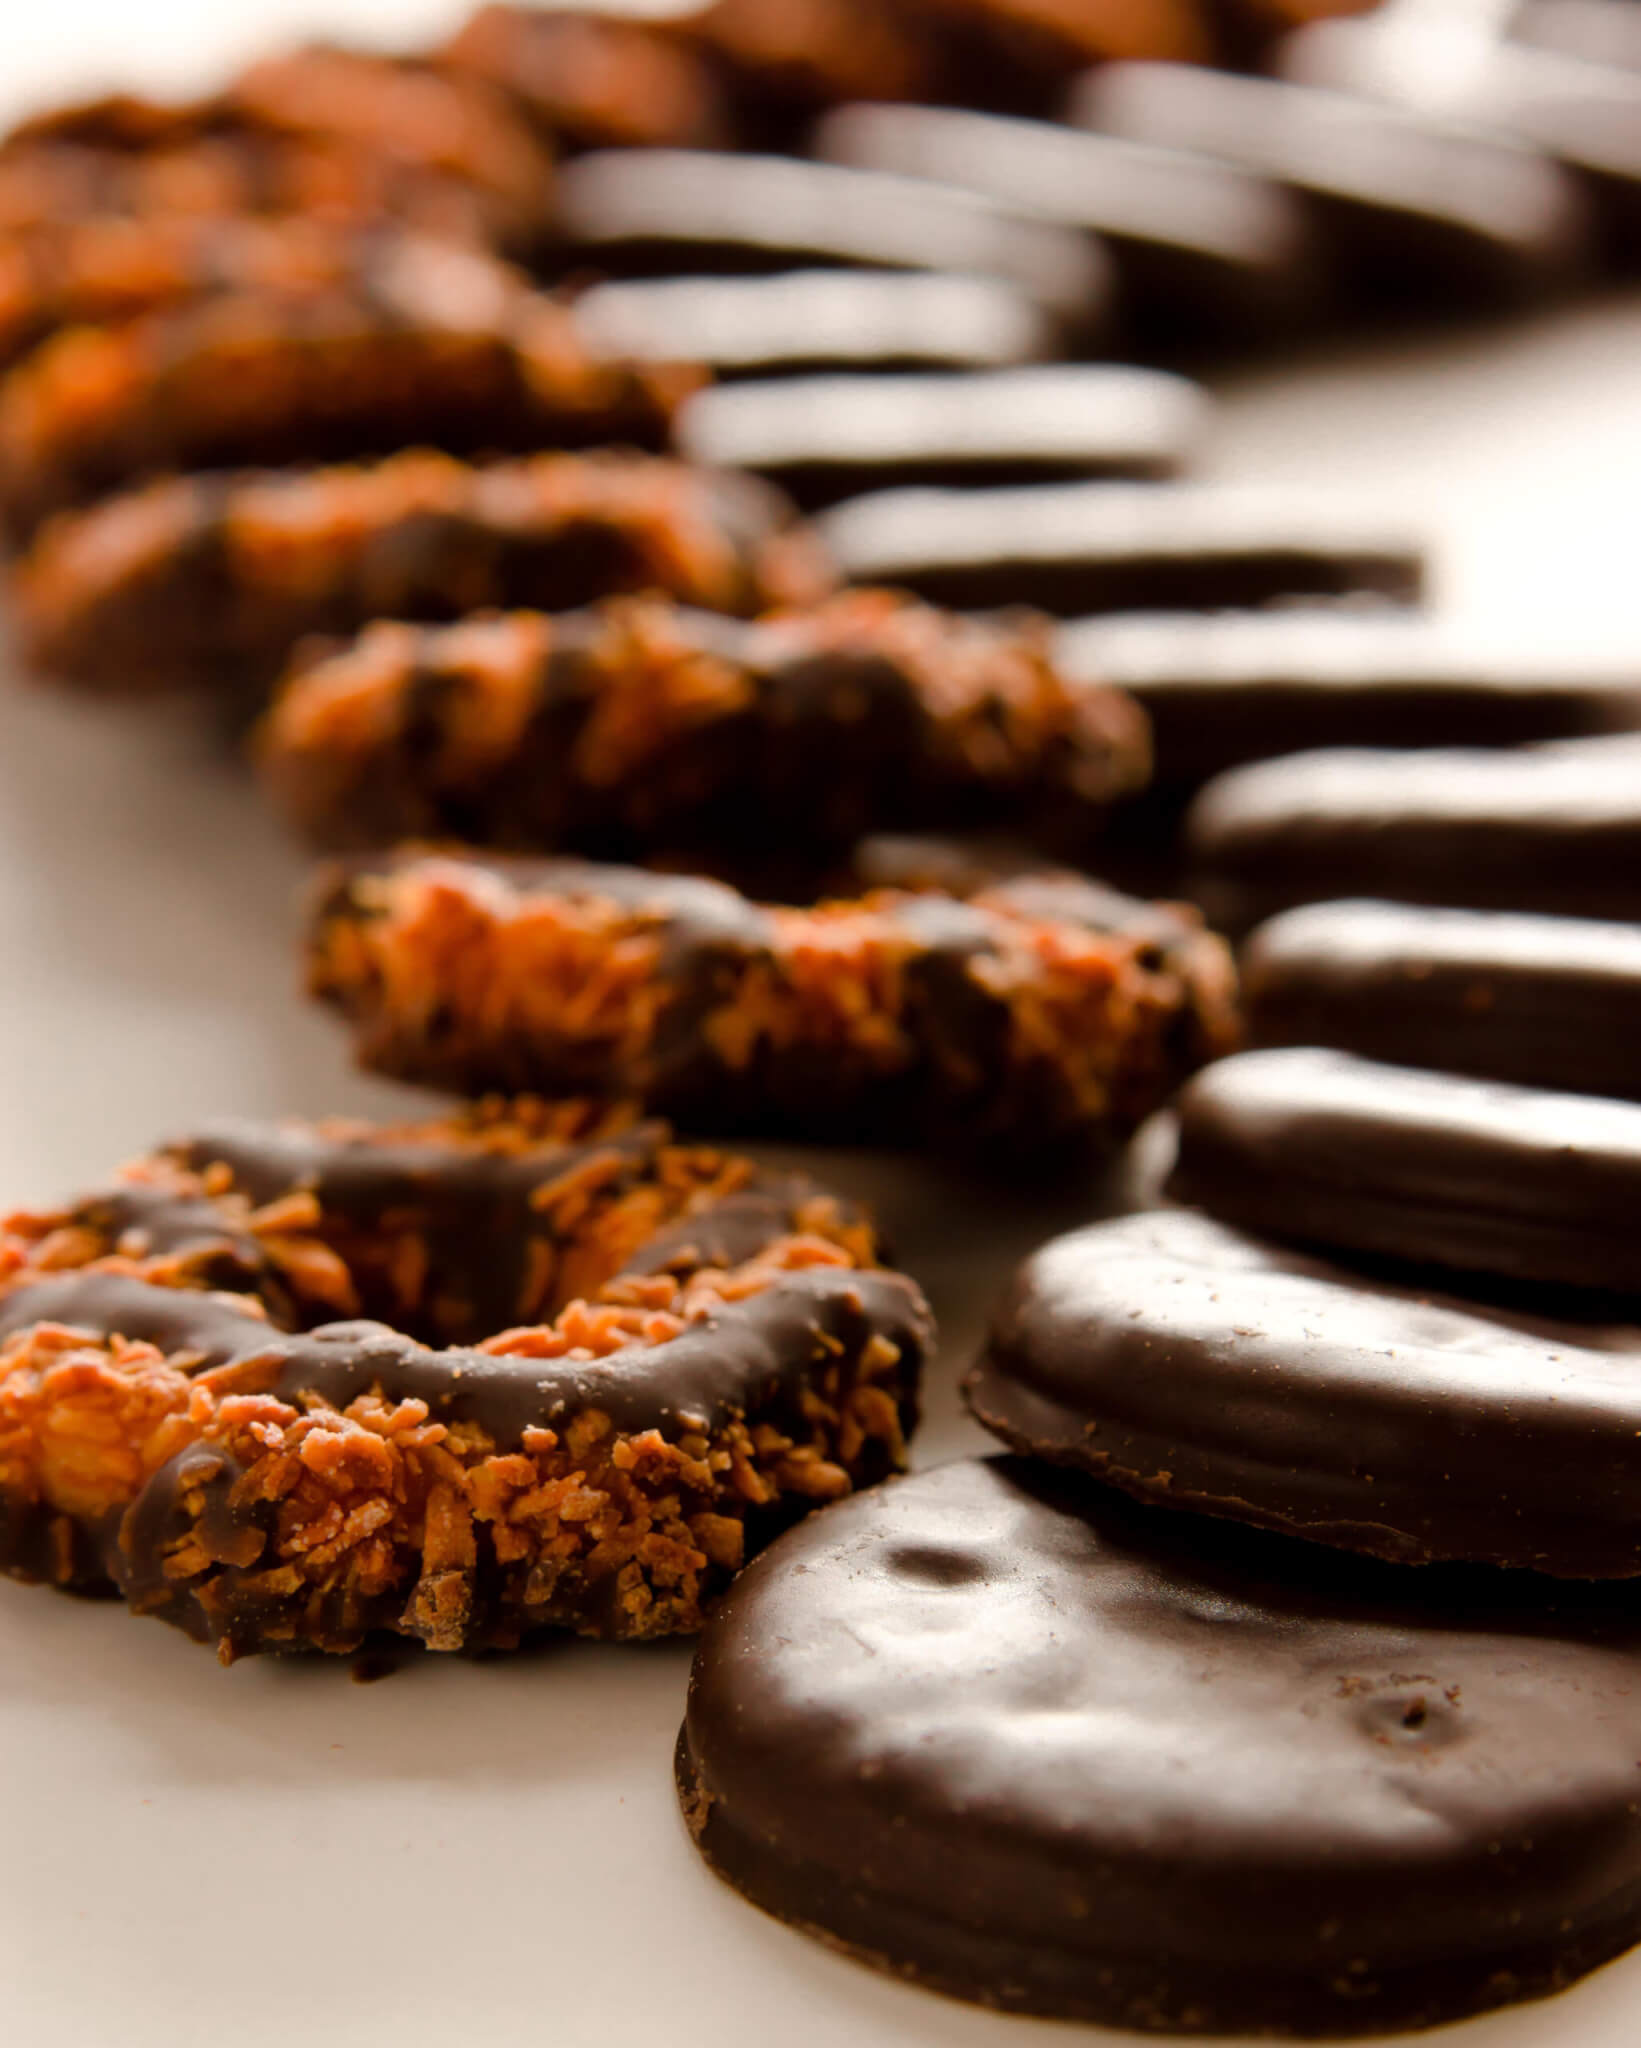 Girl Scout Cookies - Thin Mints & Samoas